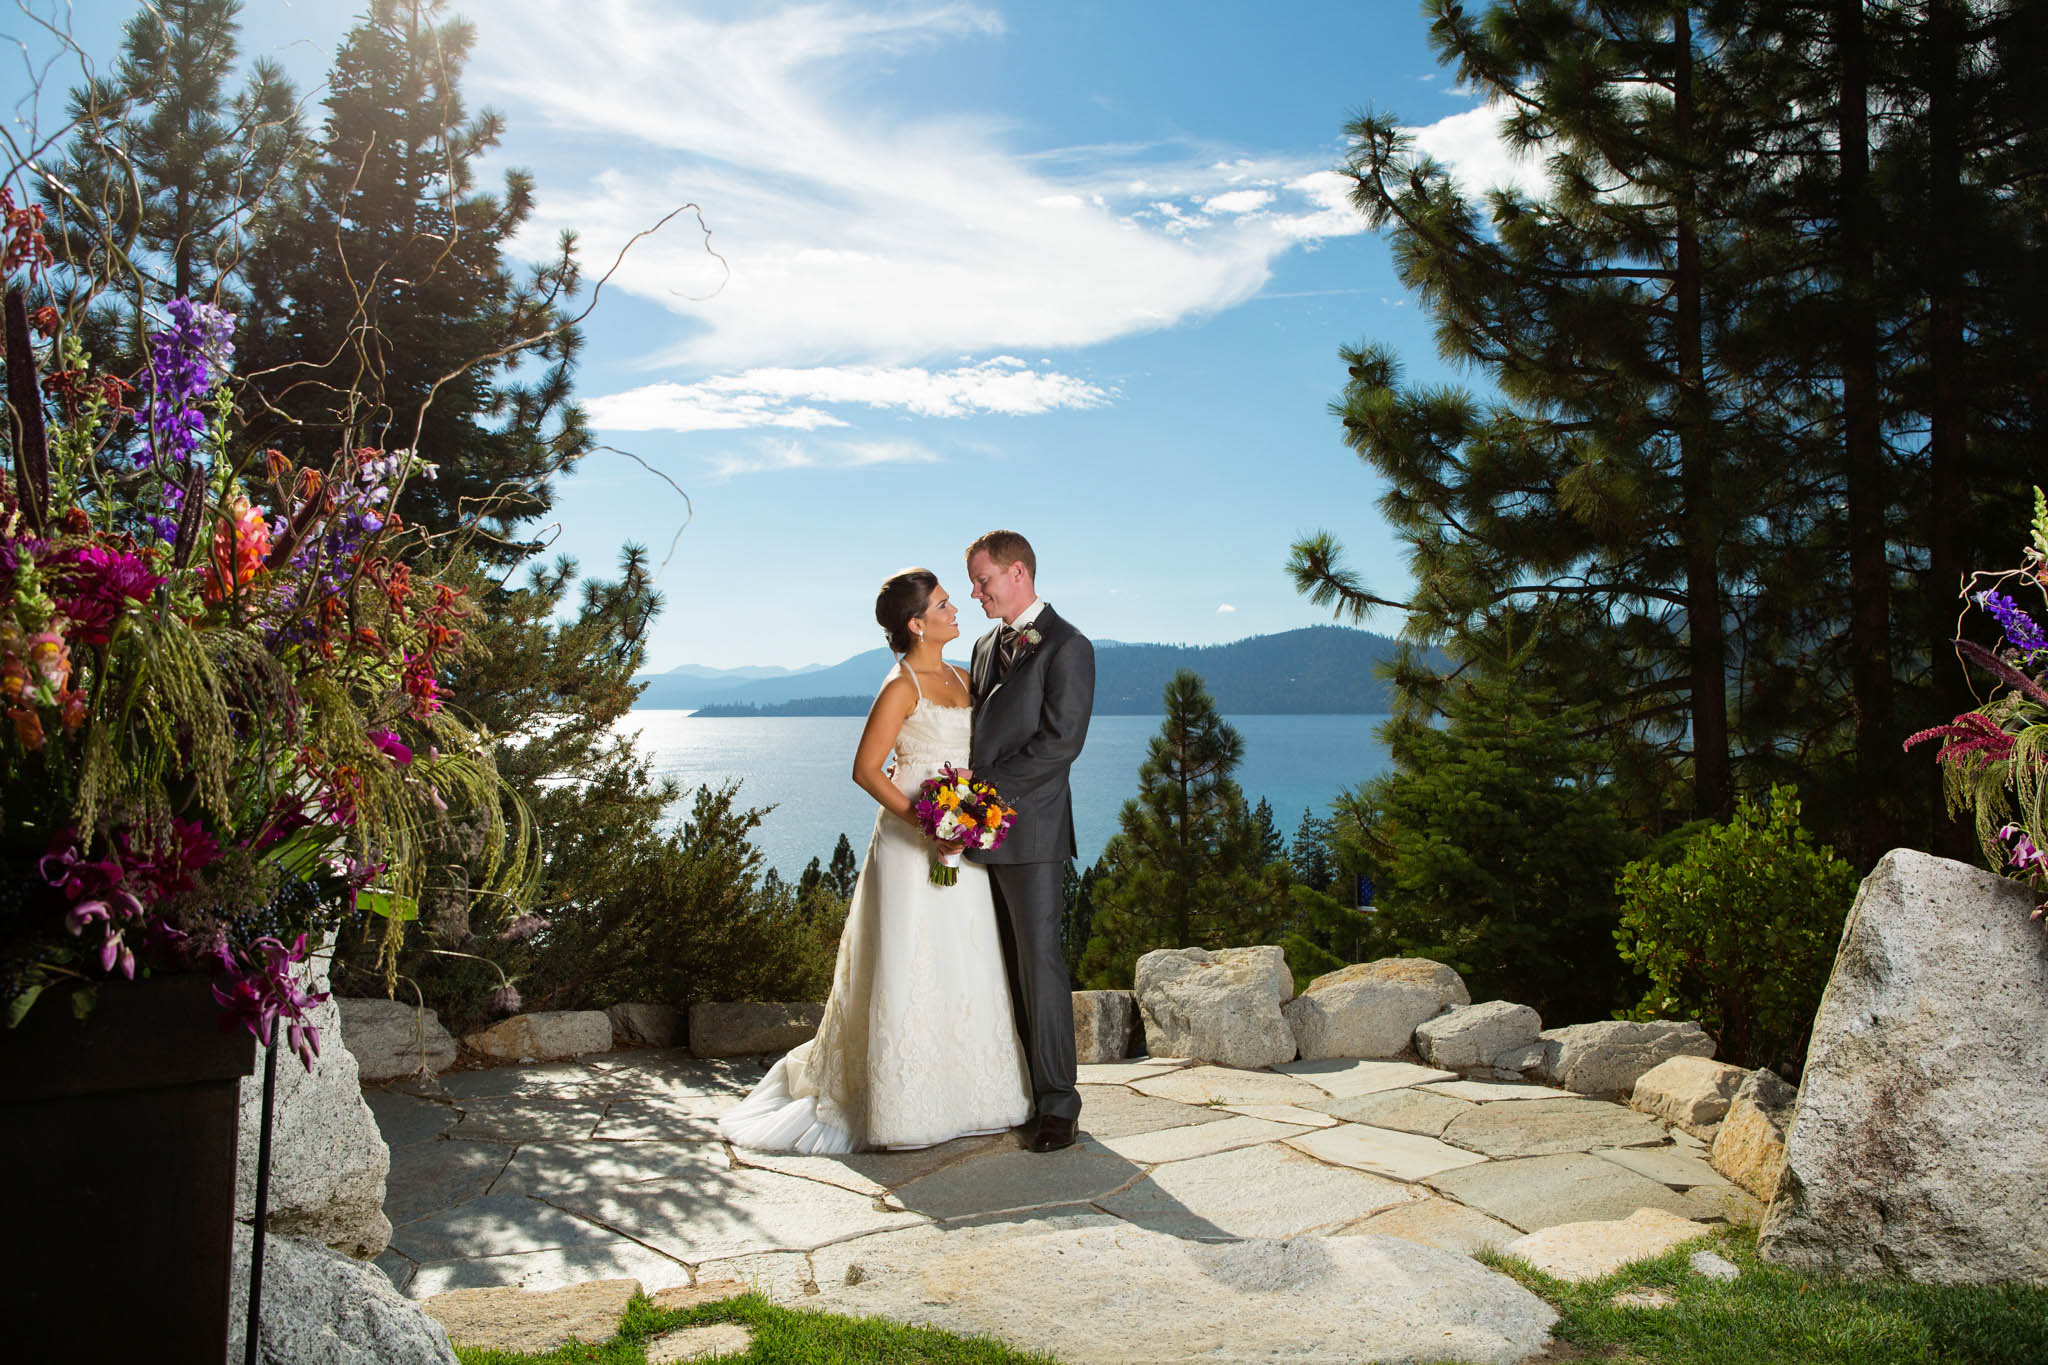 brode and groom portrait – North Lake Tahoe Incline Village wedding photography